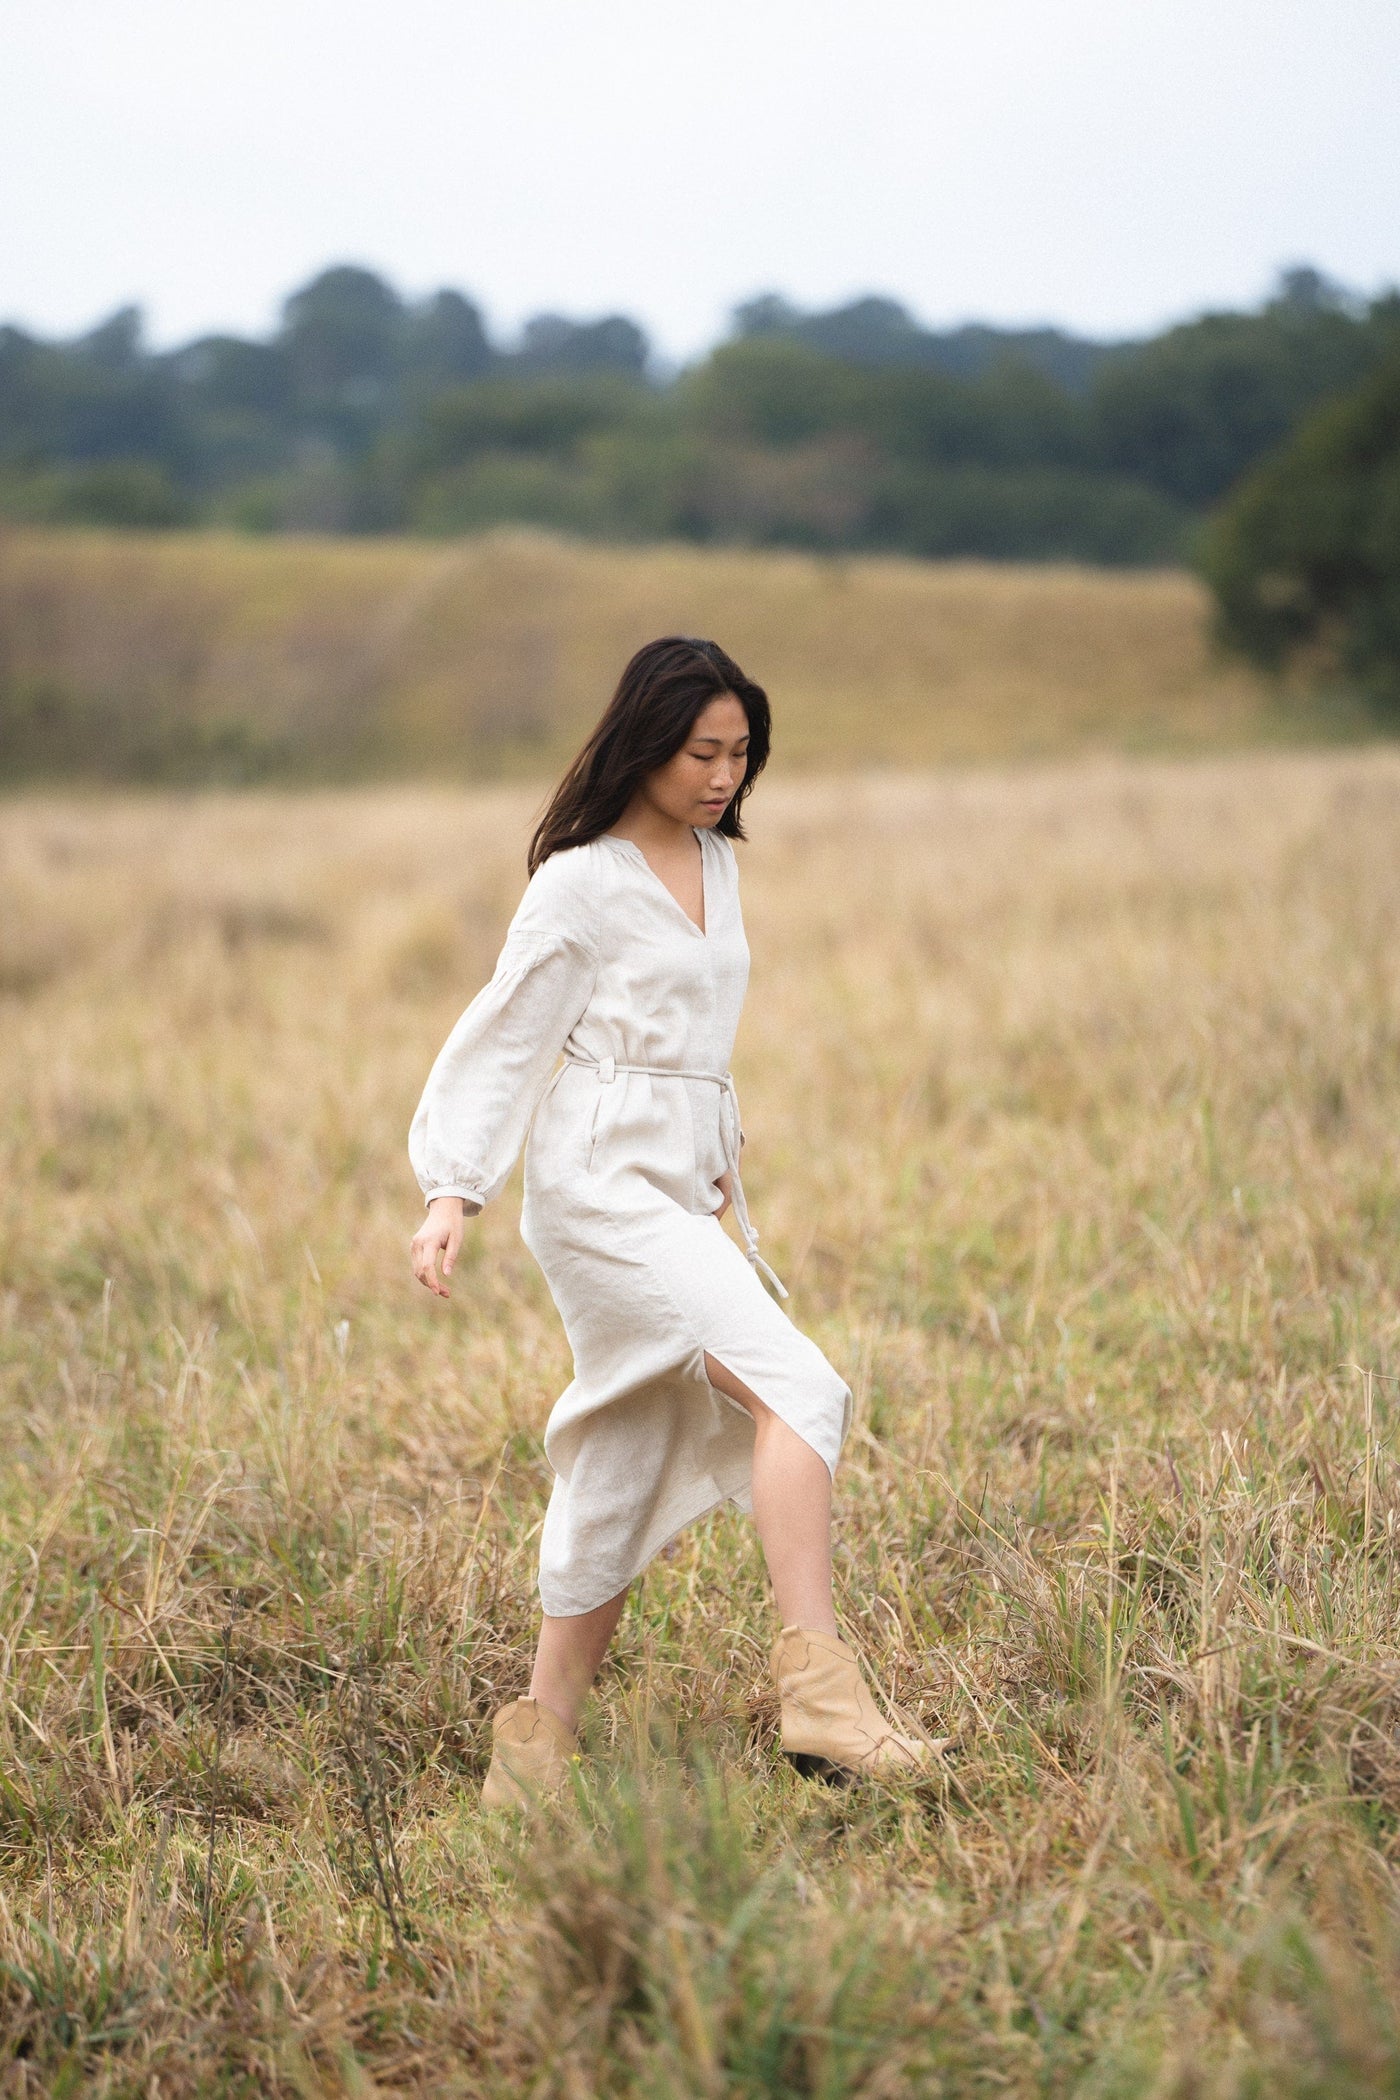 LILLY PILLY Collection Skylar Linen Dress made from 100% organic linen in Oatmeal